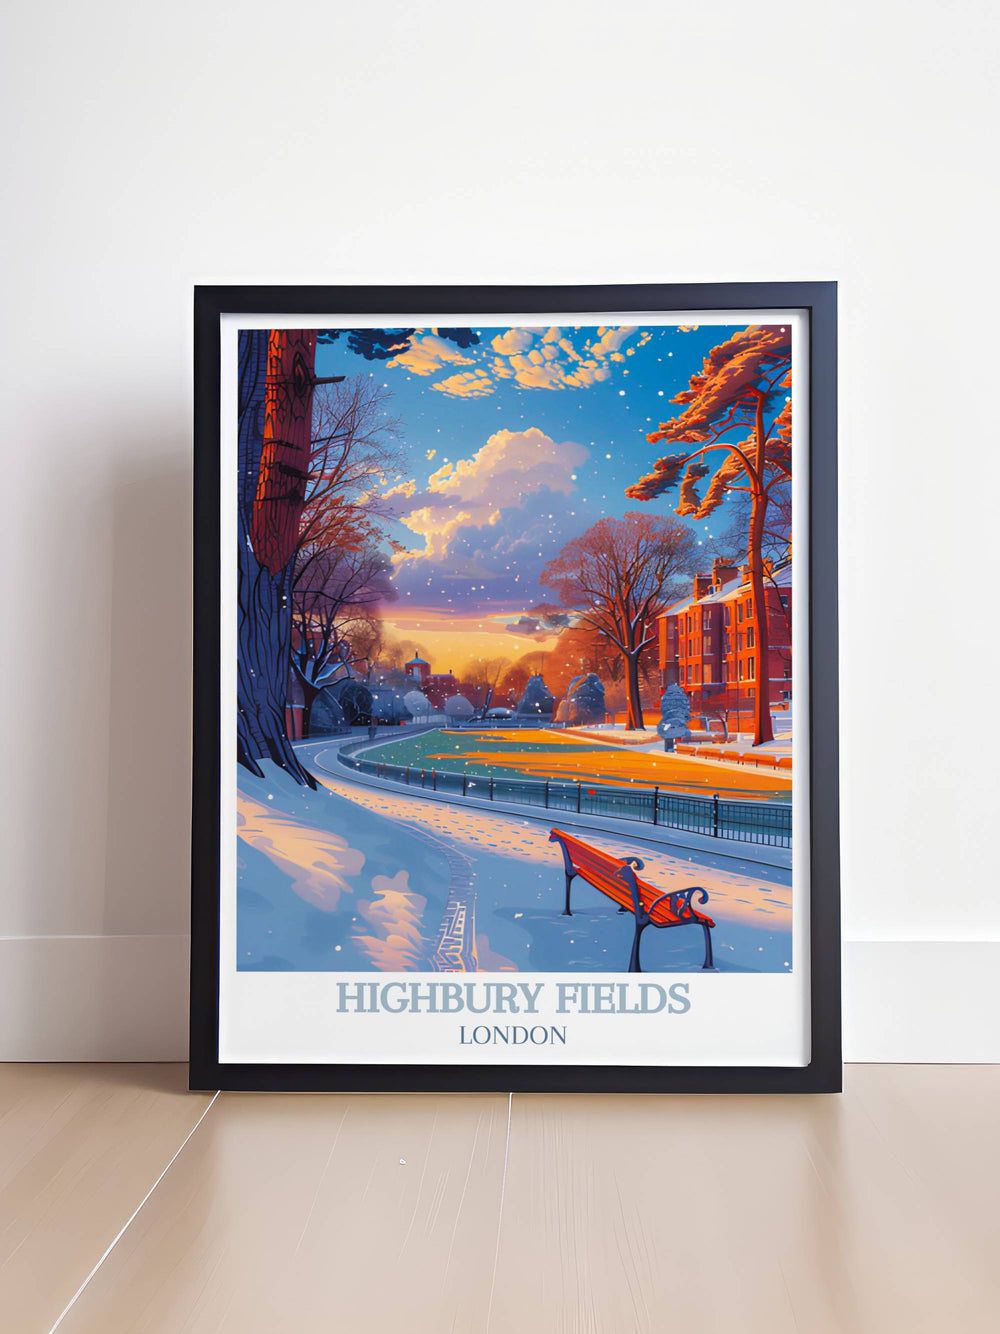 Modern wall decor of Highbury Fields park highlighting detailed views of lush landscapes and tranquil settings in London